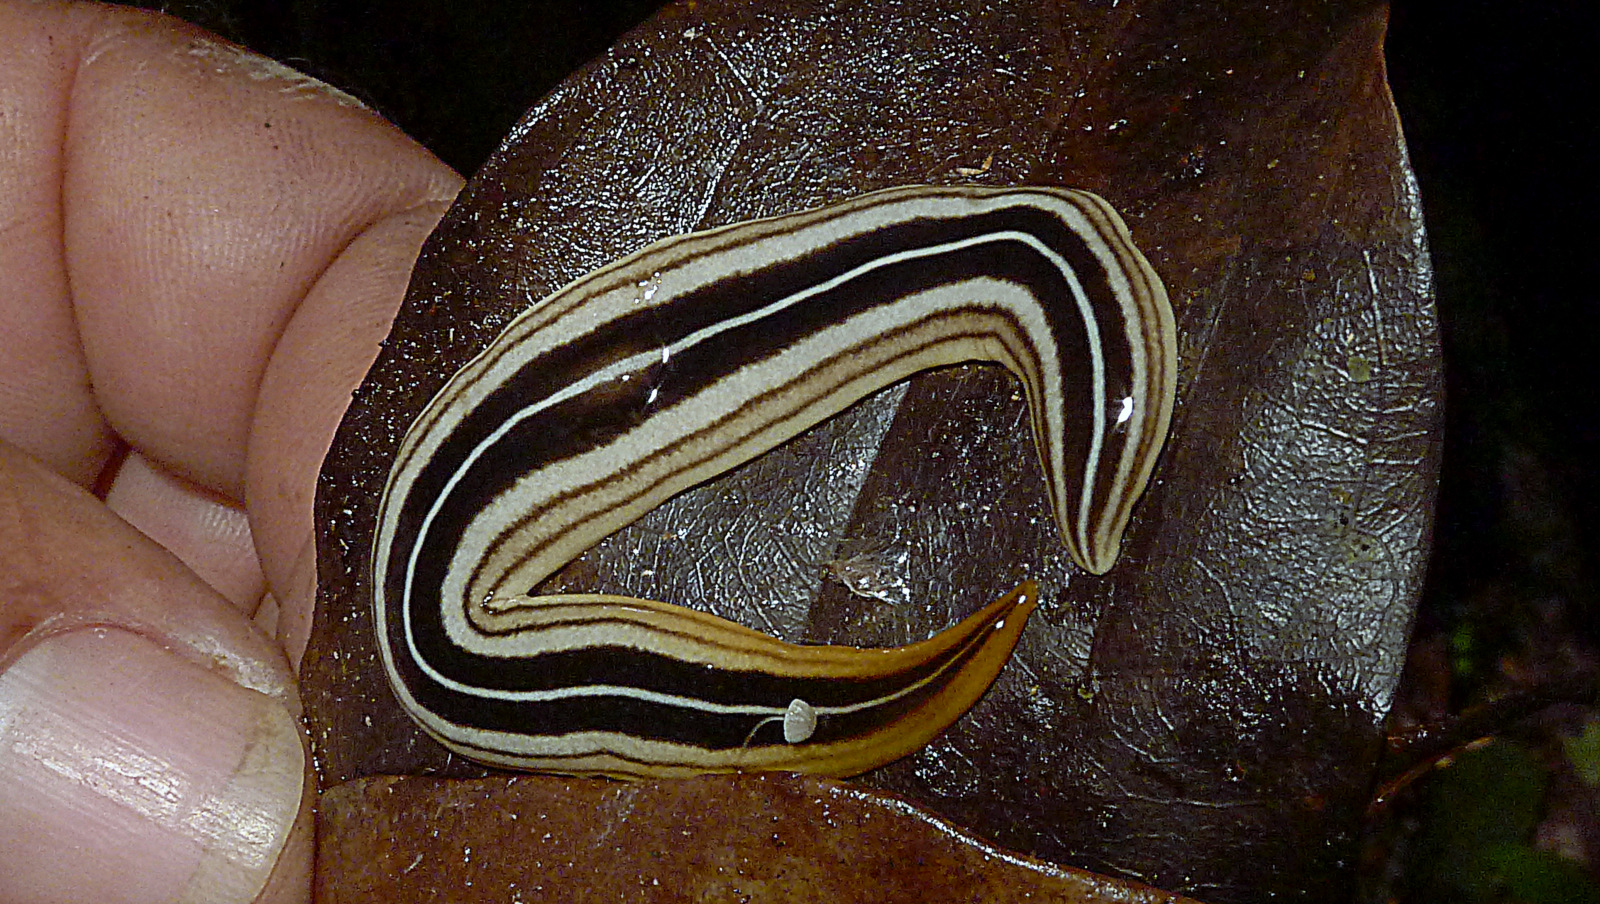 Platyhelminthes, Tricladida, Terricola, Atlantic forest, northern littoral of Bahia, Brazil (14617707721).jpg